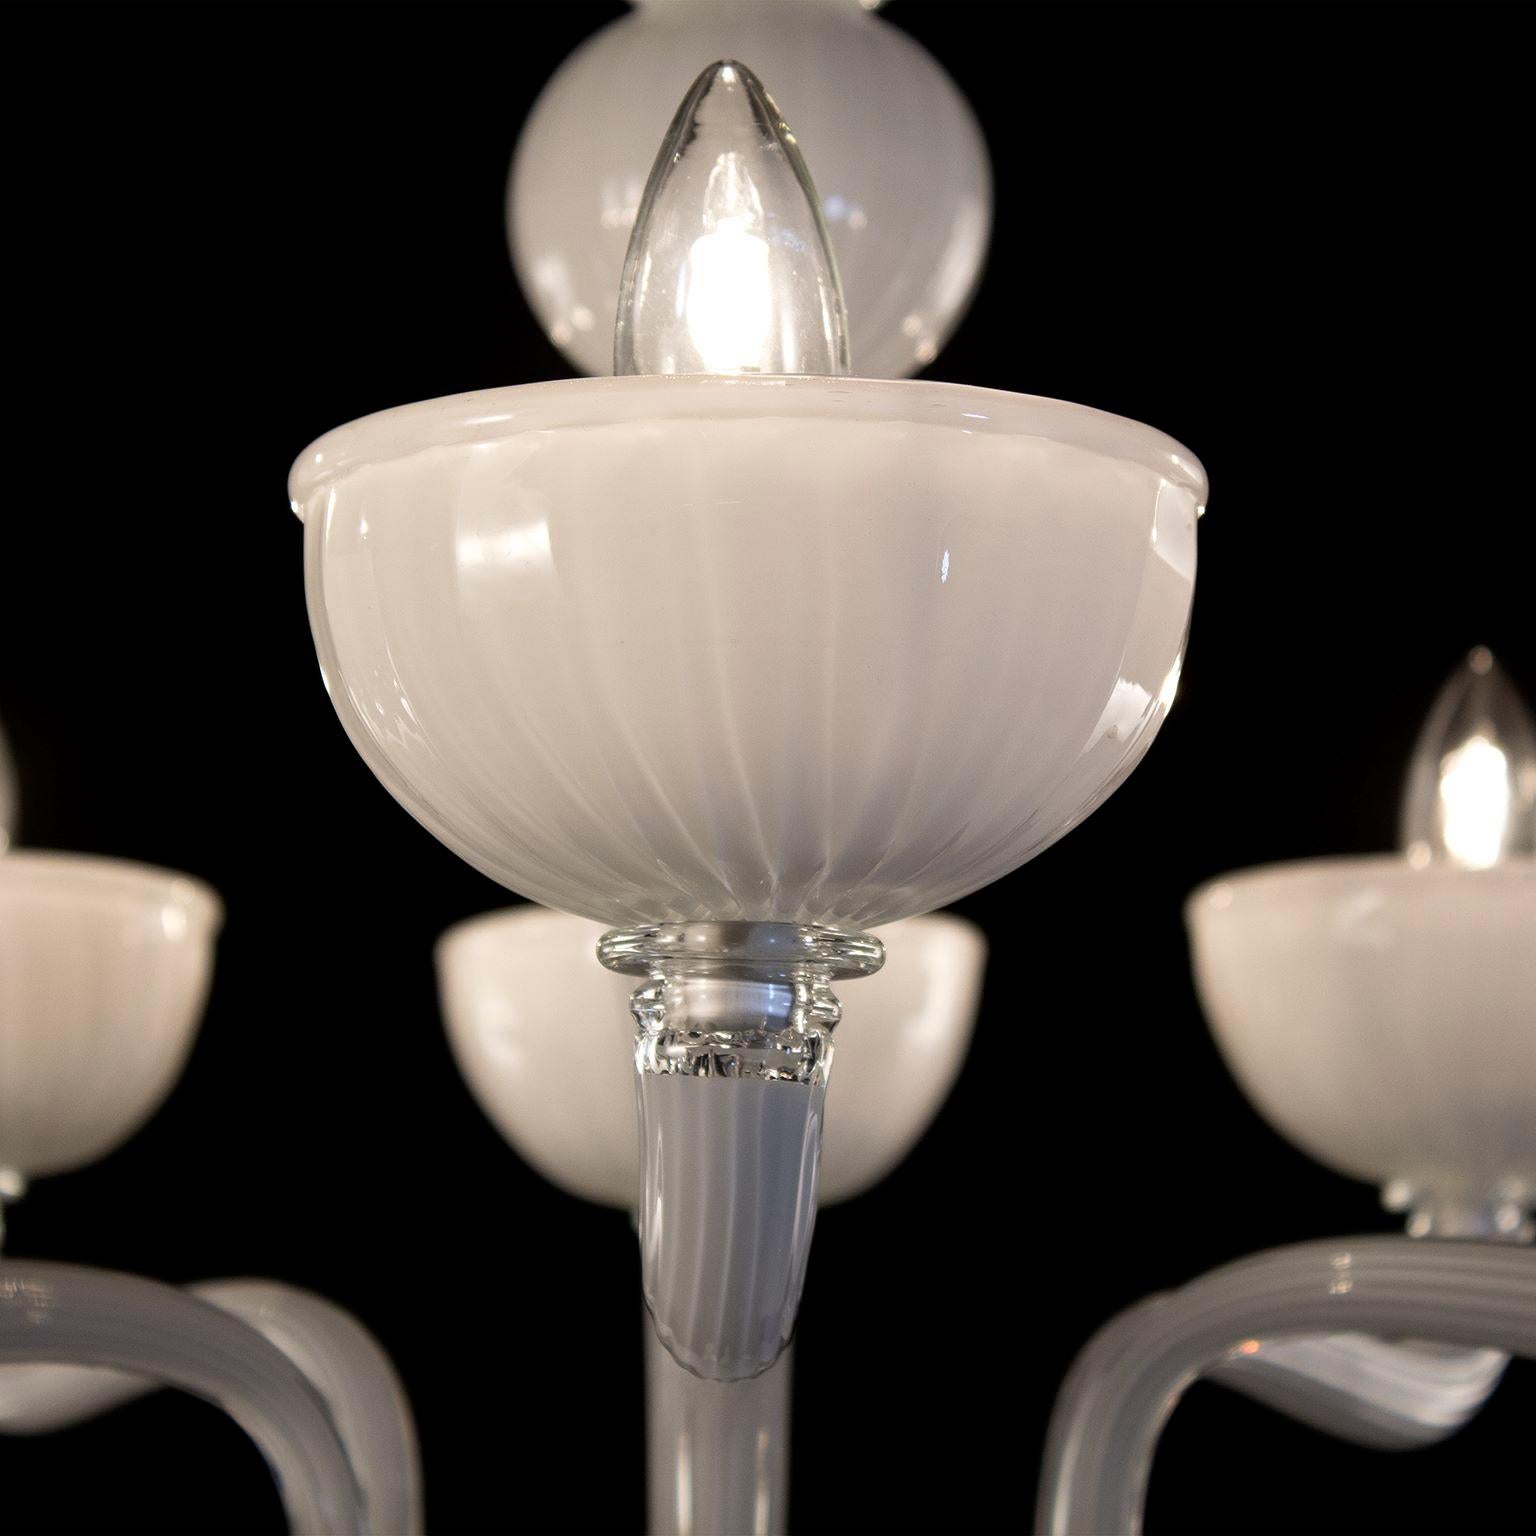 Edgar chandelier, 6 lights, white encased rigadin Murano glass by Multiforme
Edgar Murano glass chandelier is one of those chandeliers in our collections that stands out thanks to its harmonious and balanced shapes. We have designed a chandelier